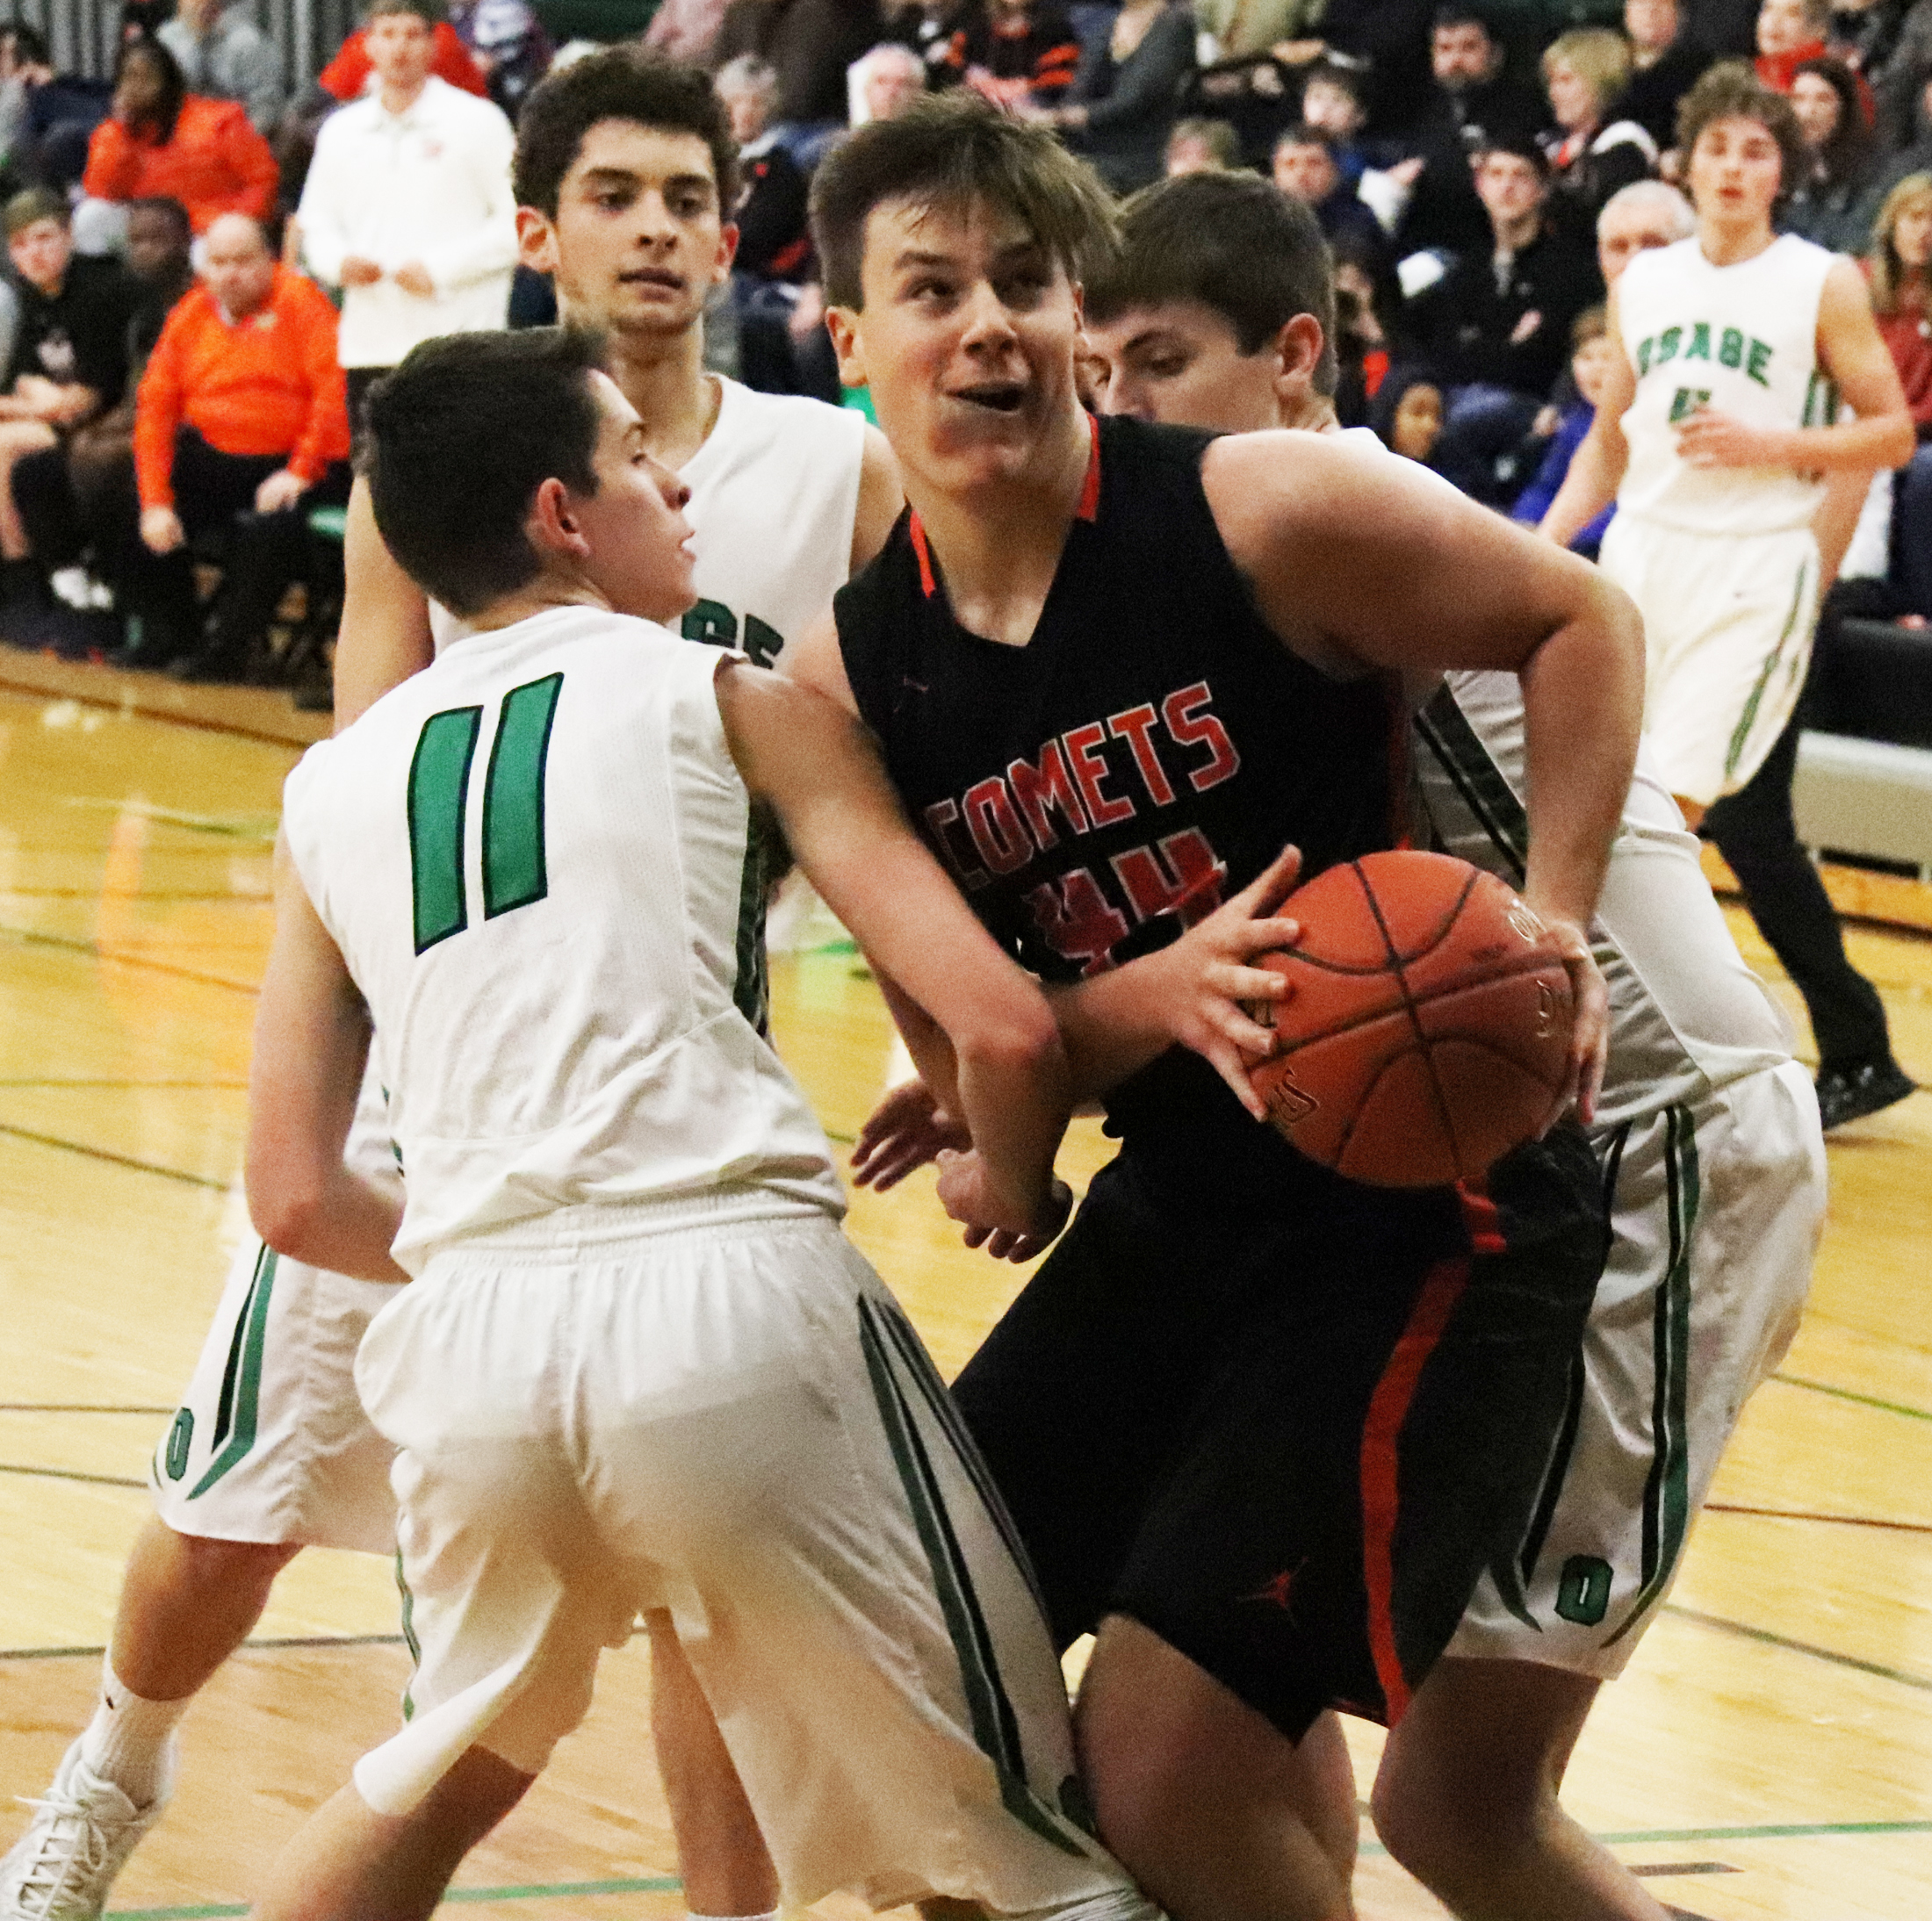 Comets draw Cadets in Class 3A-Substate 2 boys basketball 1st round